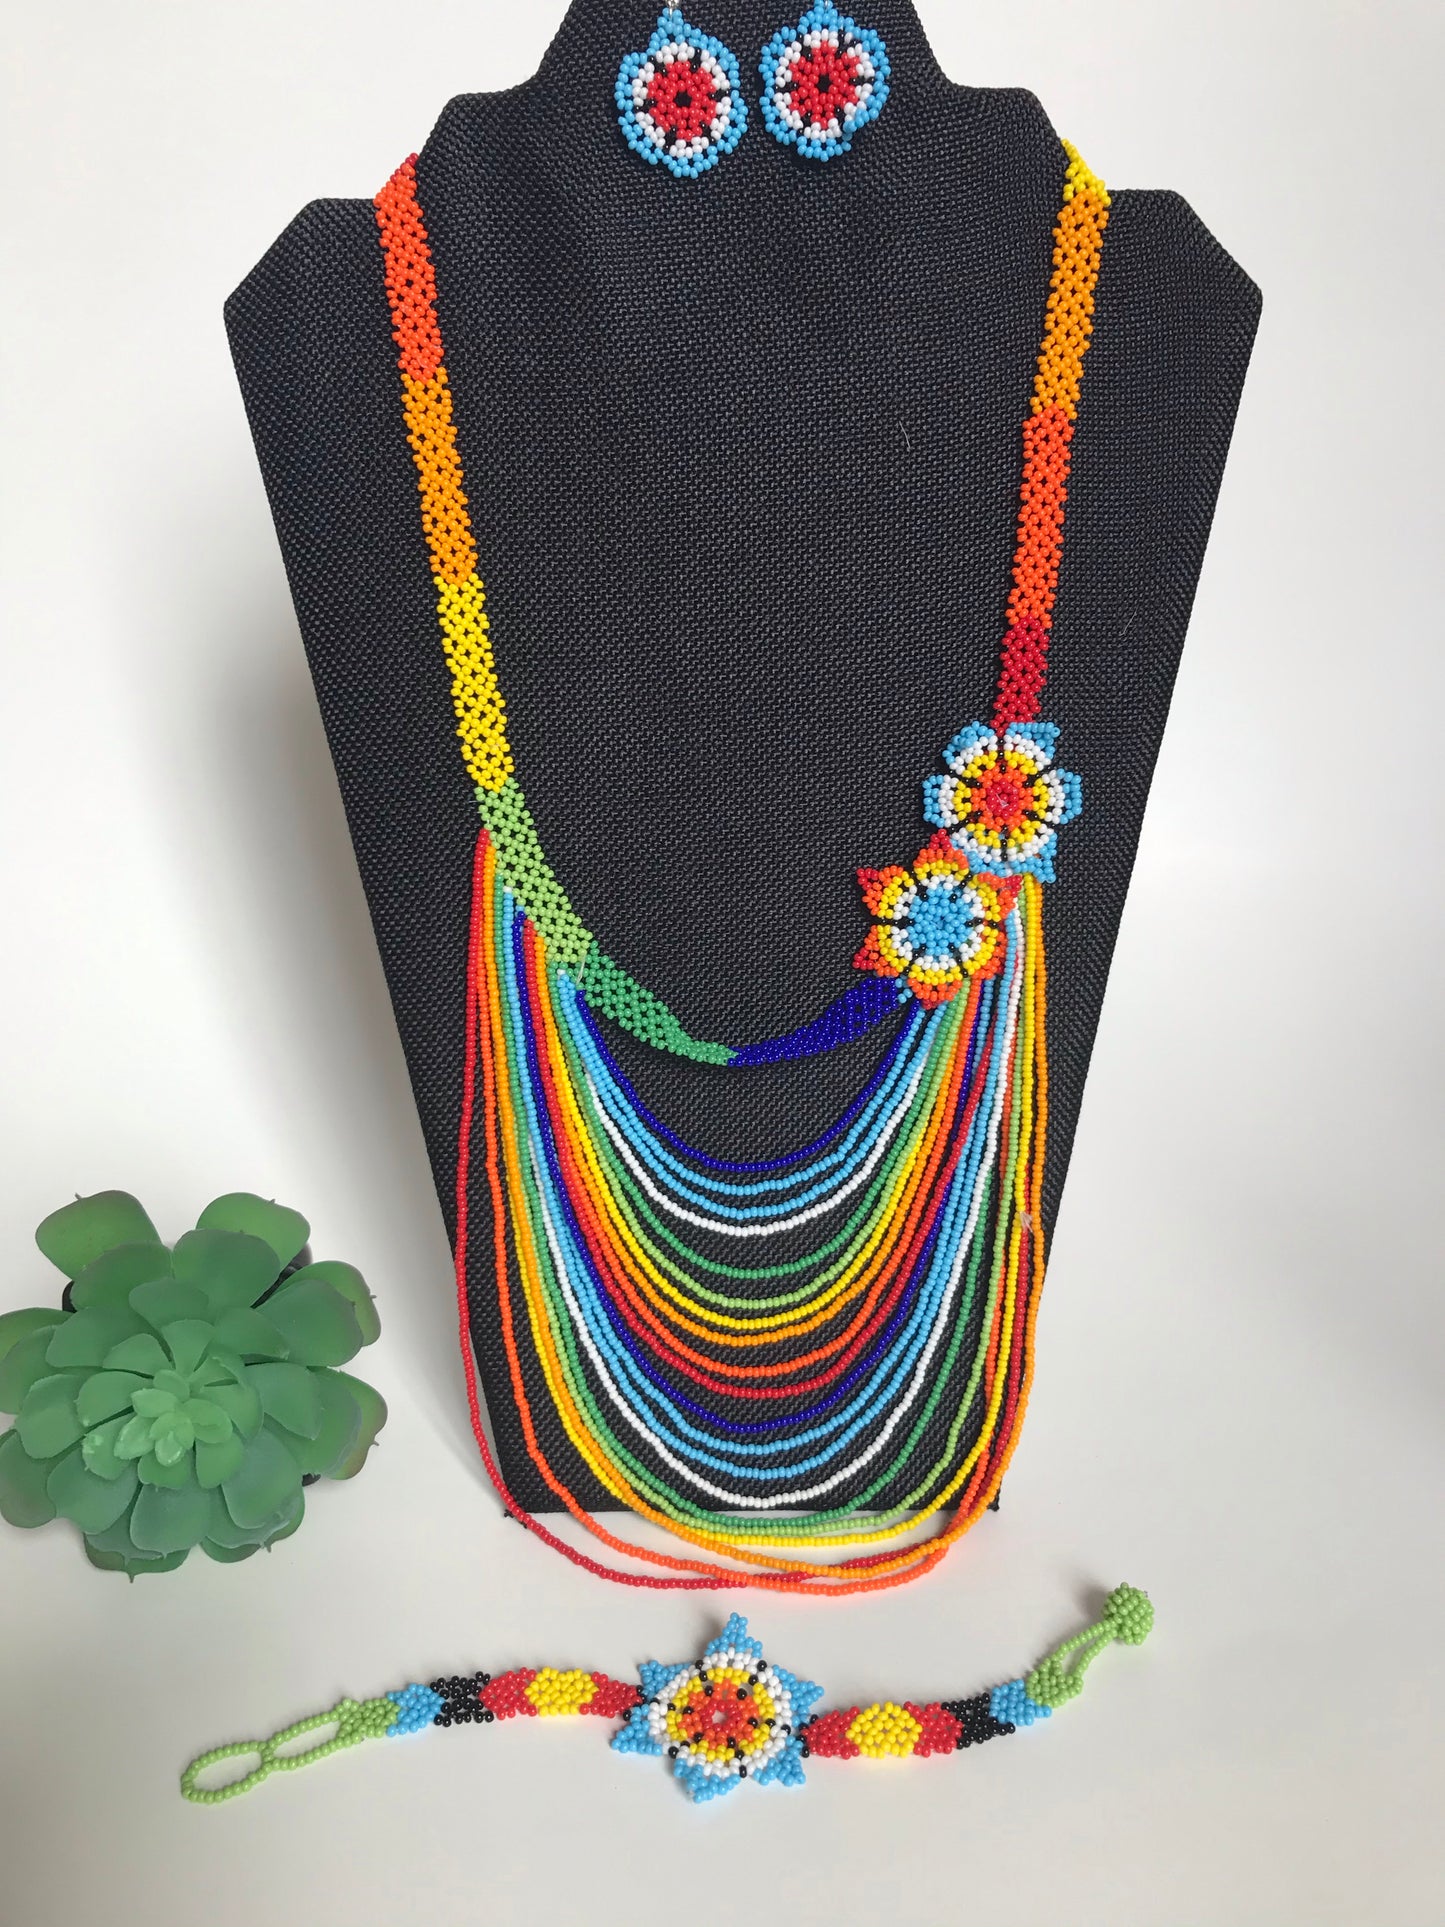 Handcrafted Bead necklace earrings set colorful jewelry